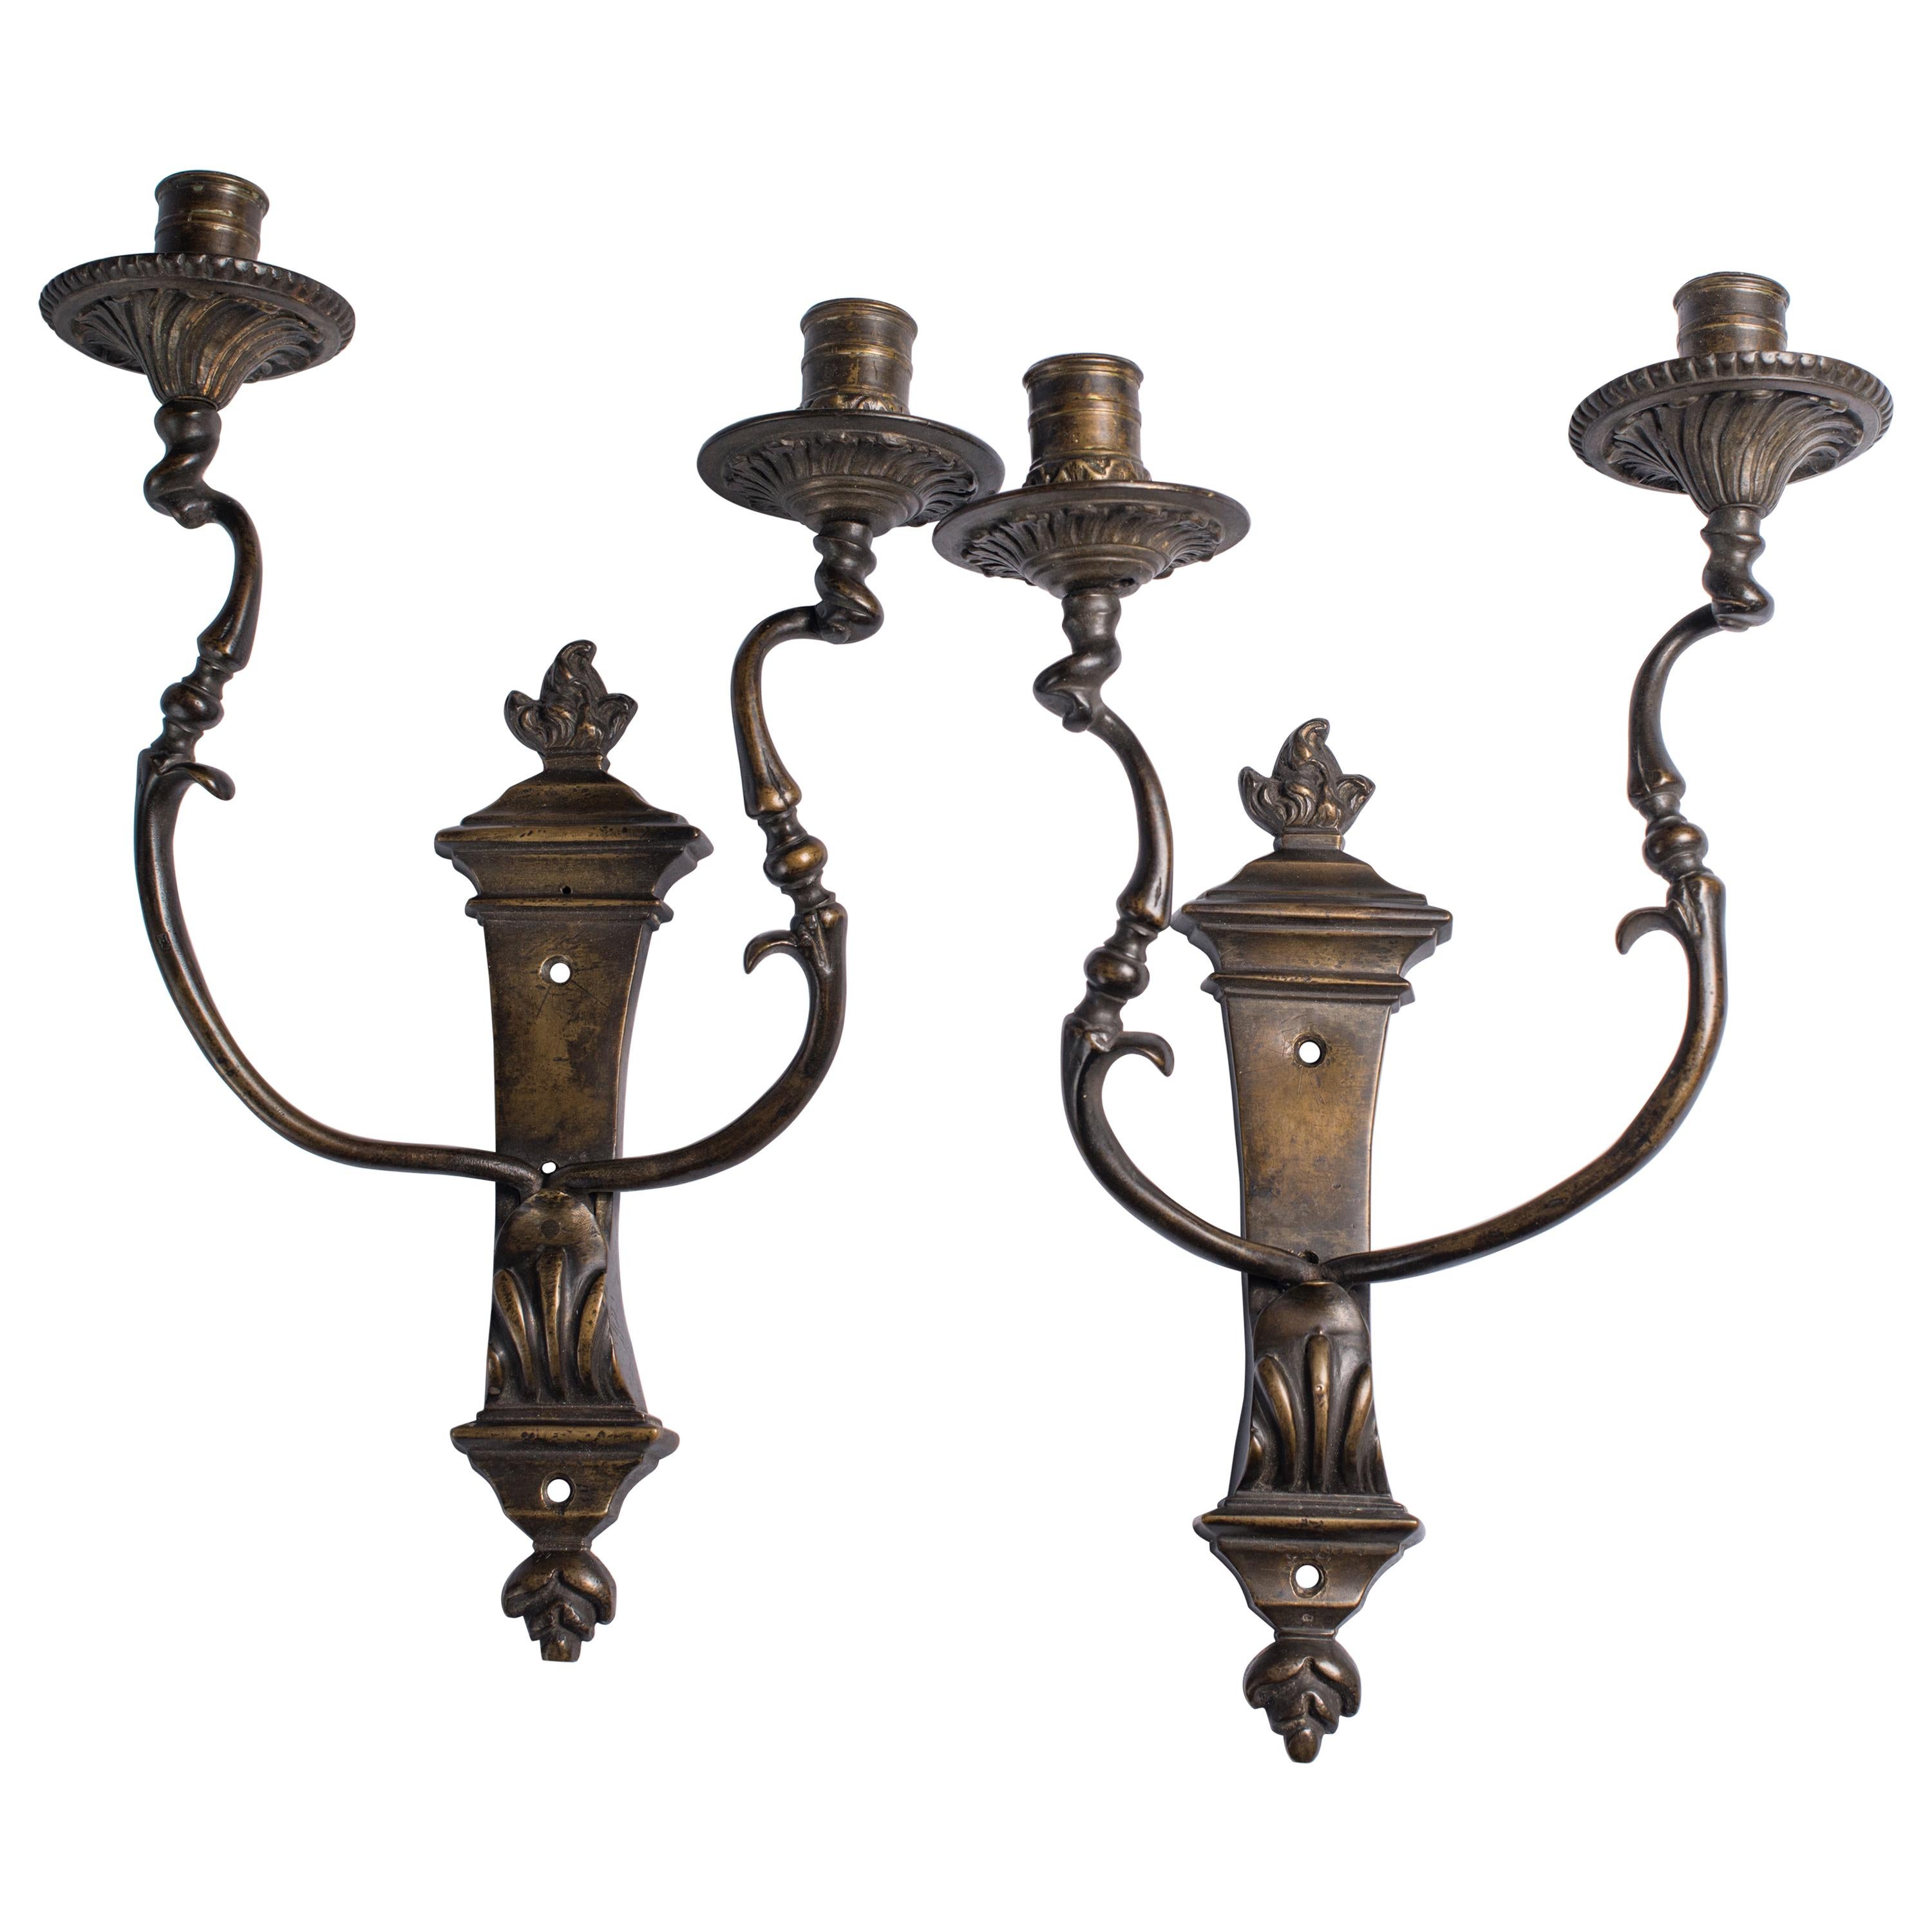 Two Patinated Bronze Two-Light Wall Lights, Mid-18th Century